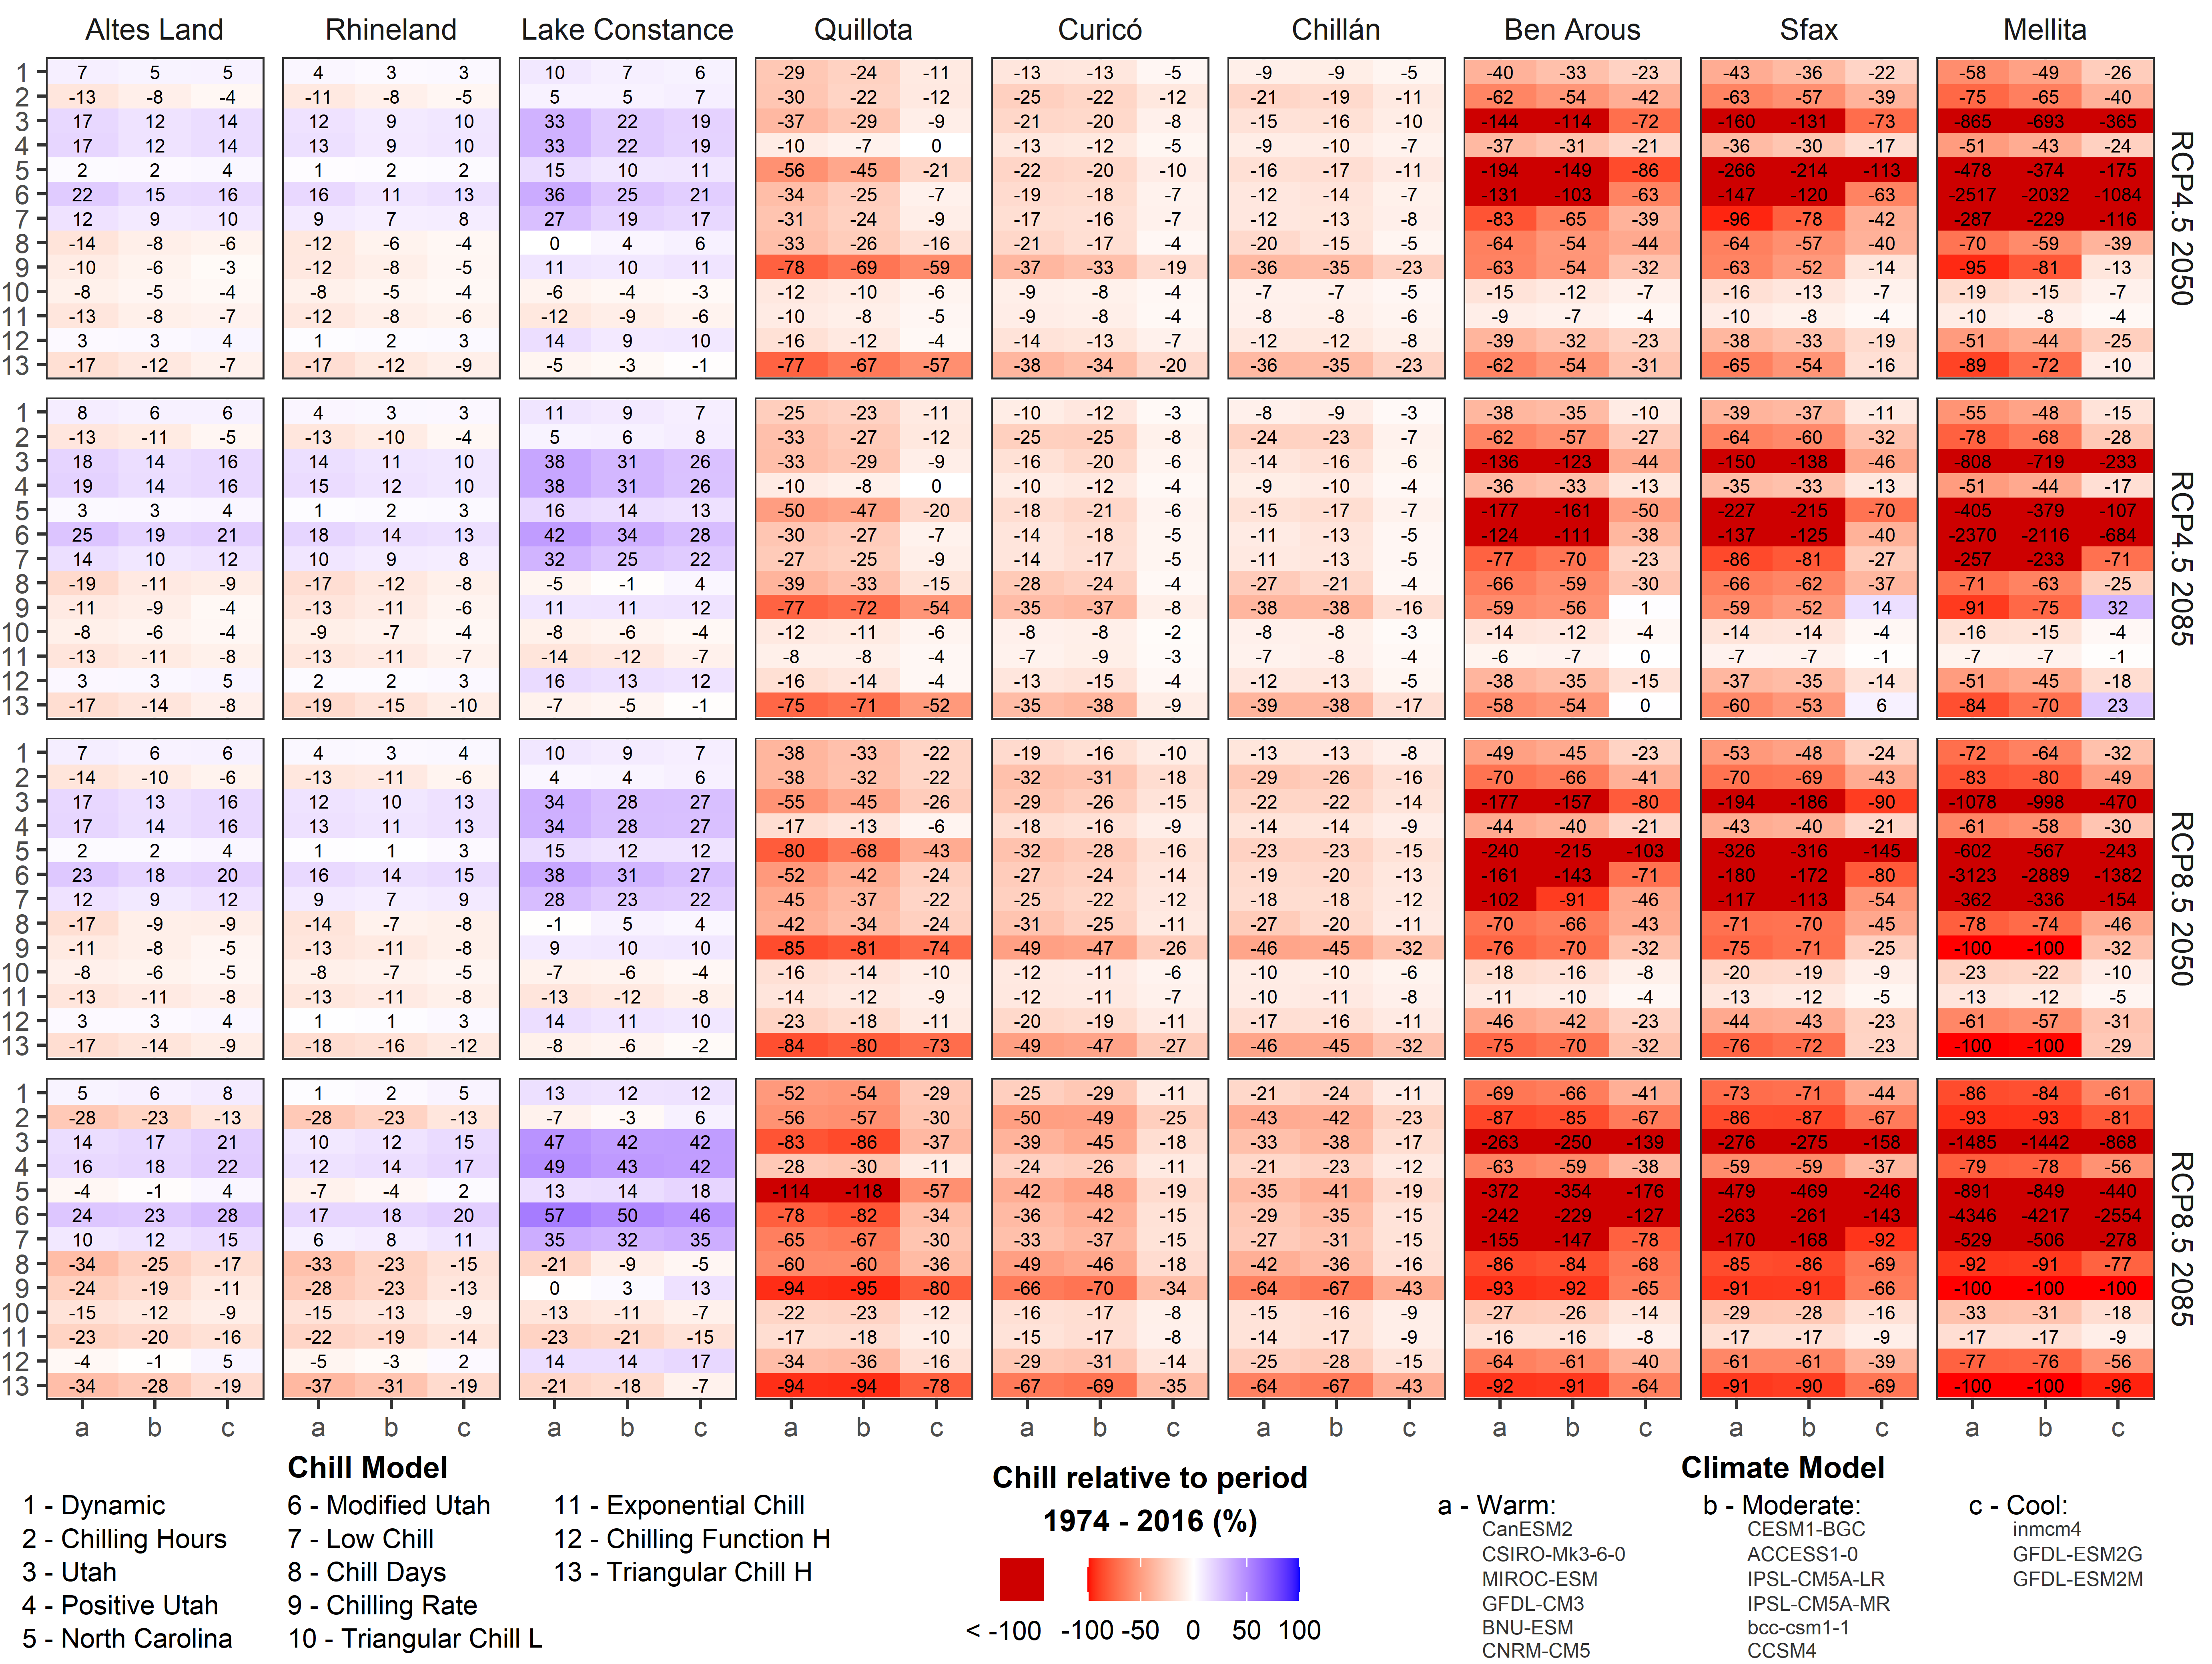 Chill change projections by a total of 13 chill models across different climate scenarios